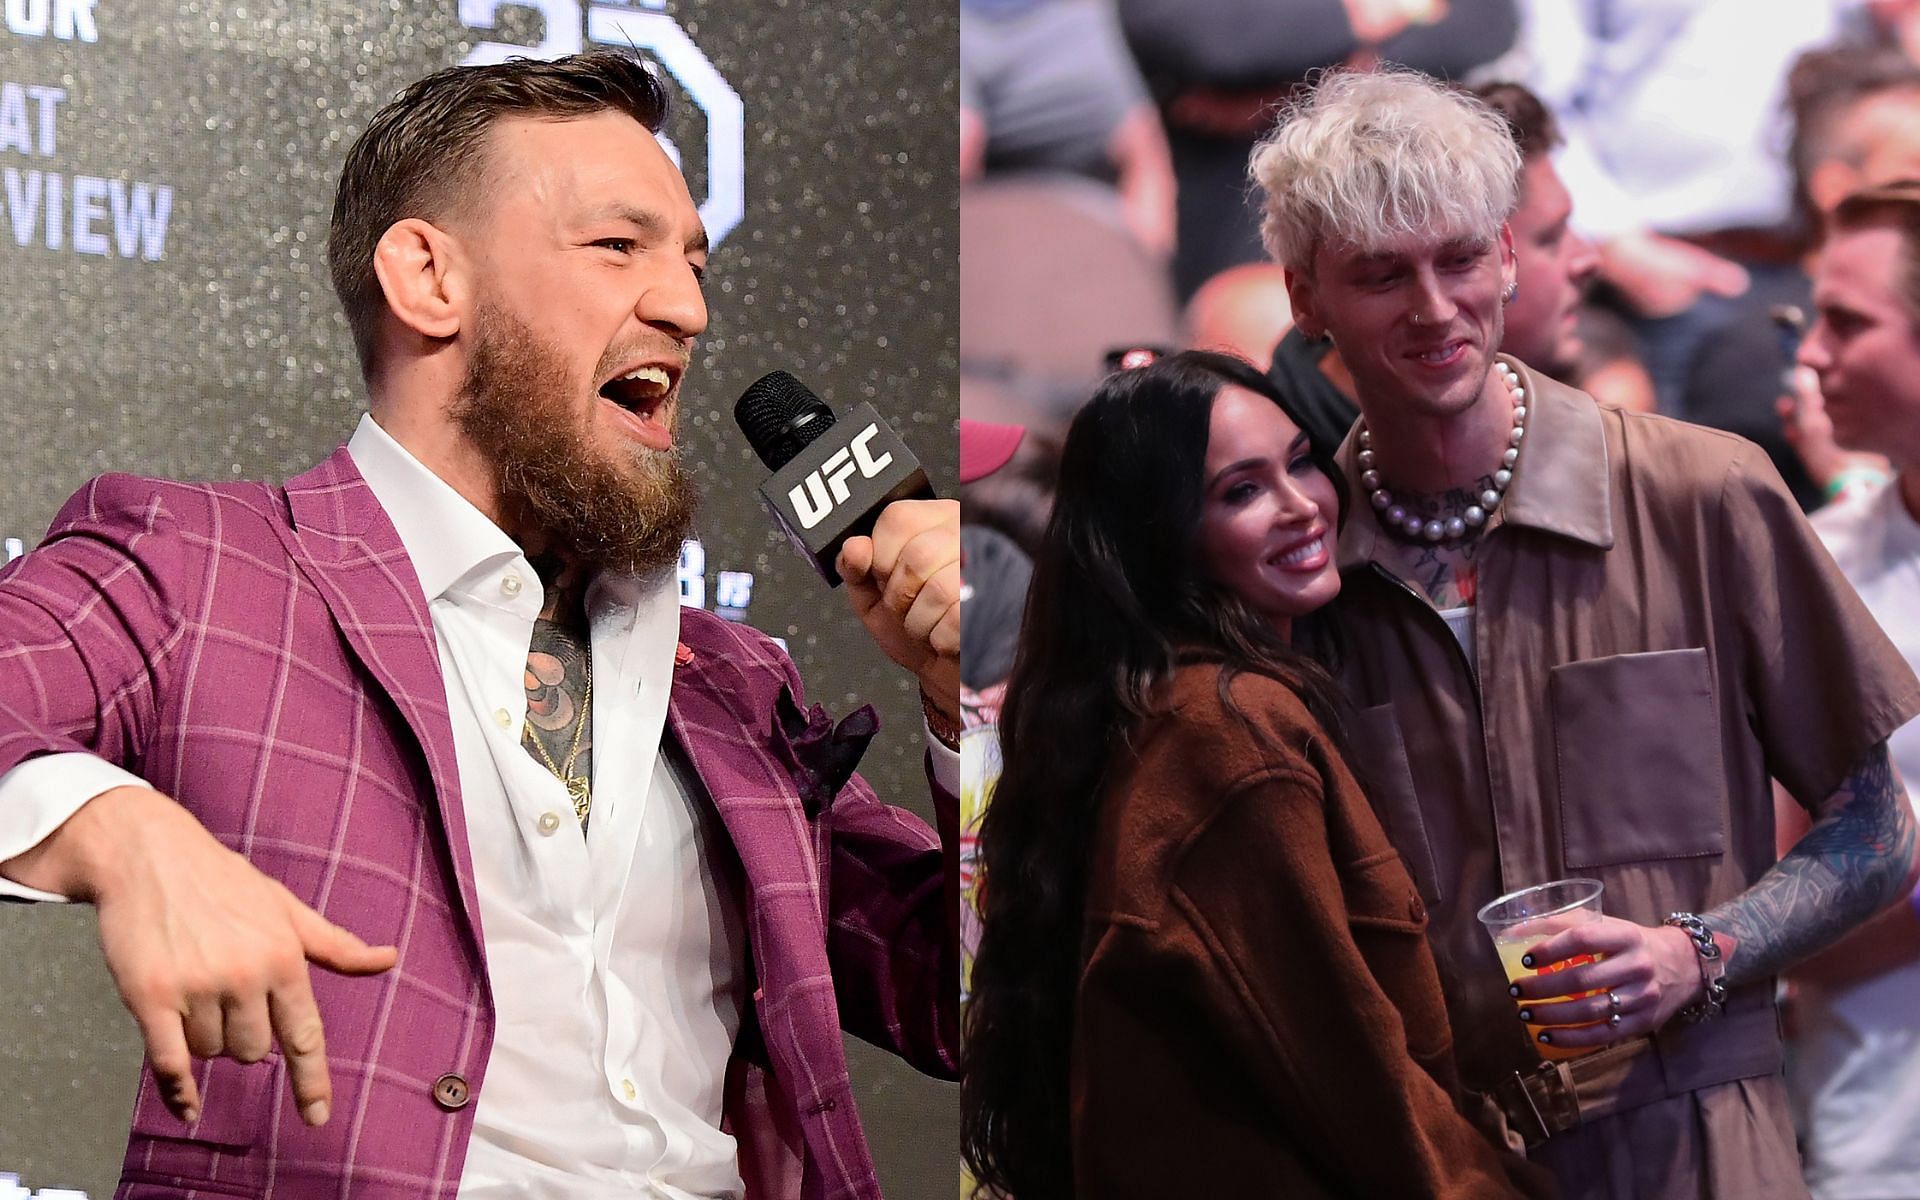 Conor McGregor (Left); Megan Fox and Machine Gun Kelly in attendance at UFC 261 in April 2021 (Right)